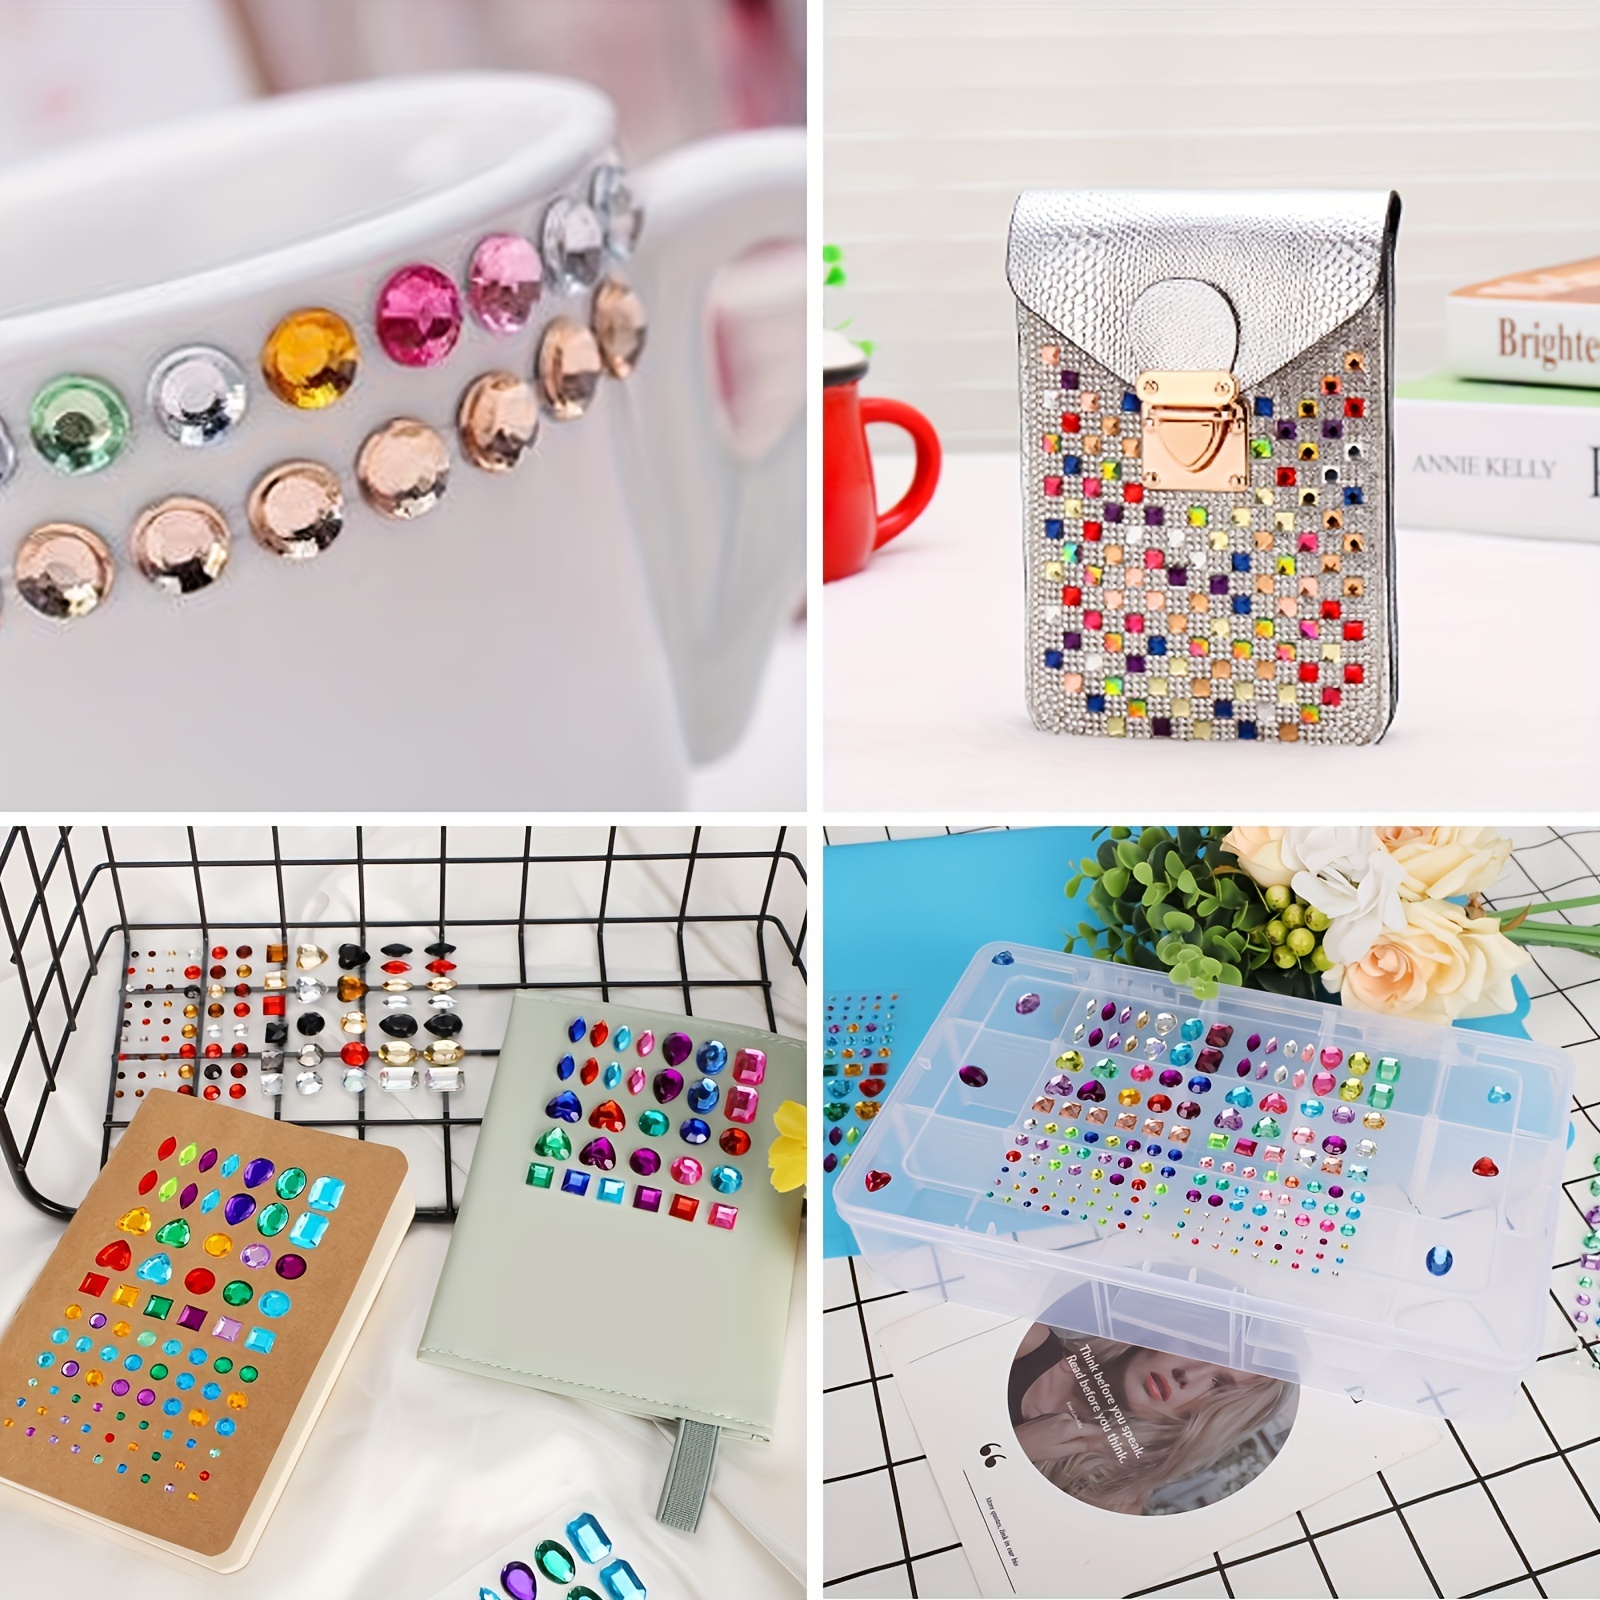 2200+Gem Stickers Jewels Stickers Rhinestone for Crafts Sticker Crystal Stickers Self Adhesive Craft Jewels for Arts & Crafts,Multicolor,Assorted